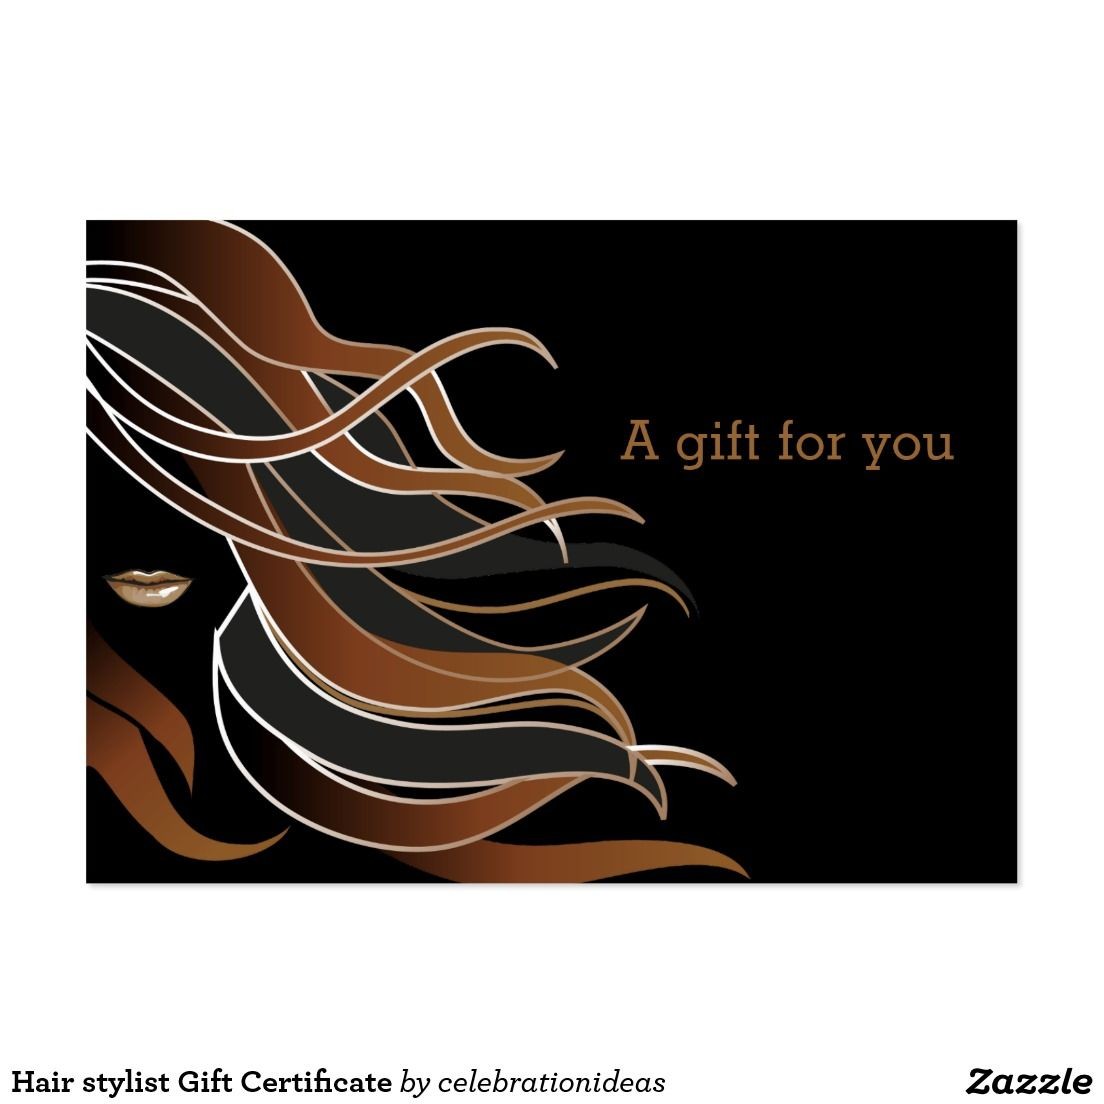 Sold Hairstylist GiftCertificate Large BusinessCard Hairdresser Zazzle Gift Certificate